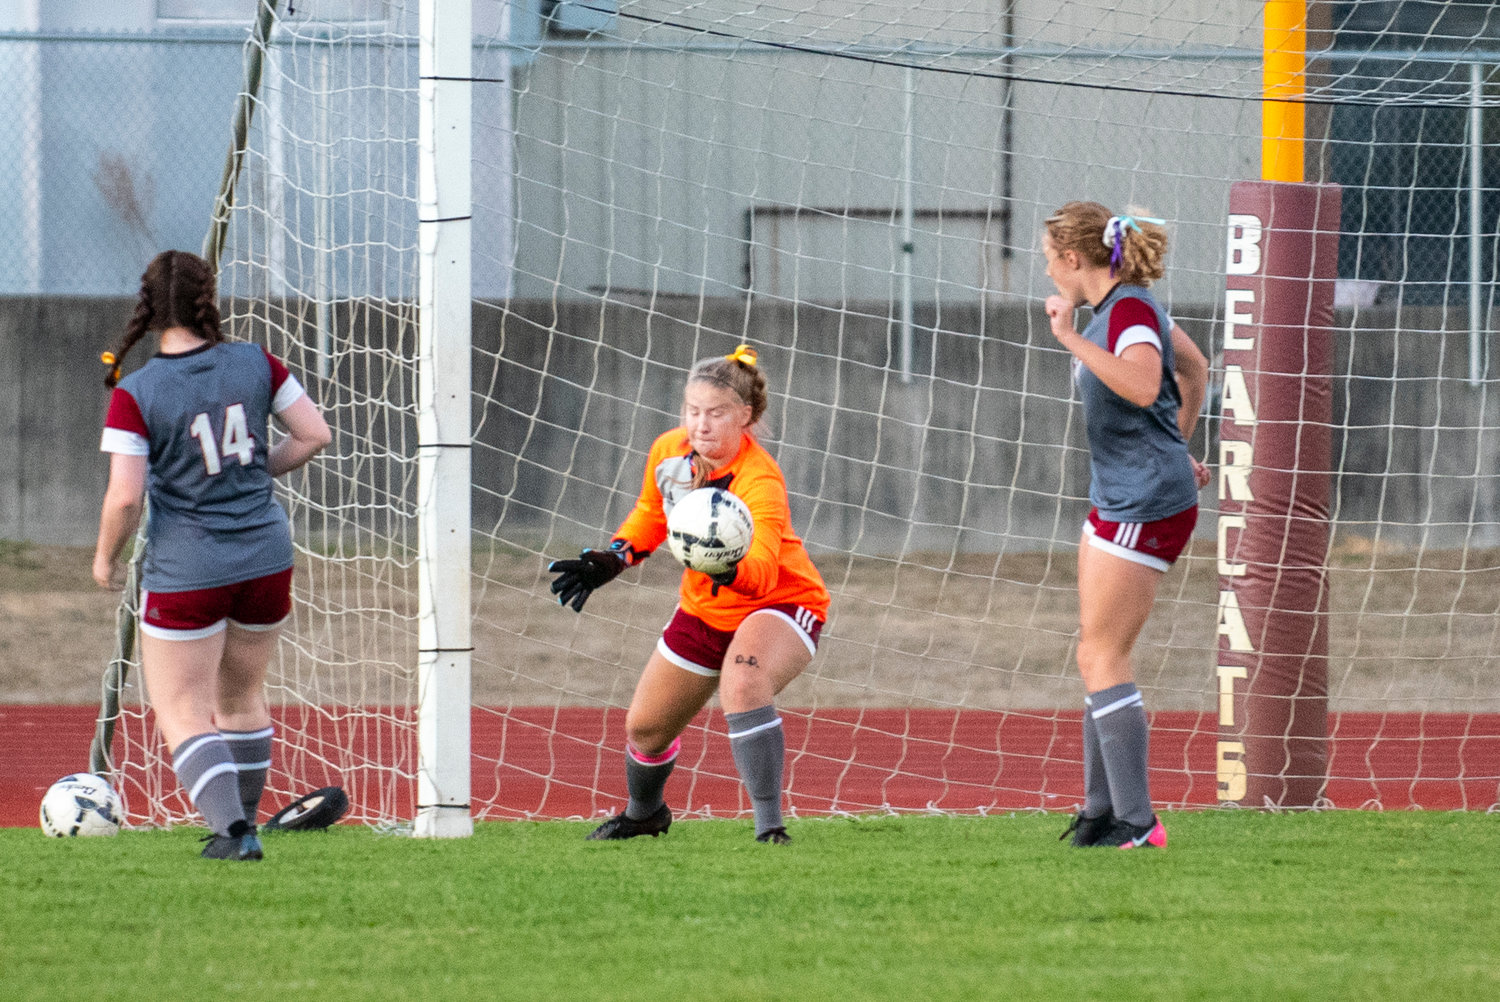 FILE PHOTO -- W.F. West keeper Carlie Deskins makes a save on a Tumwater shot last week in Chehalis.